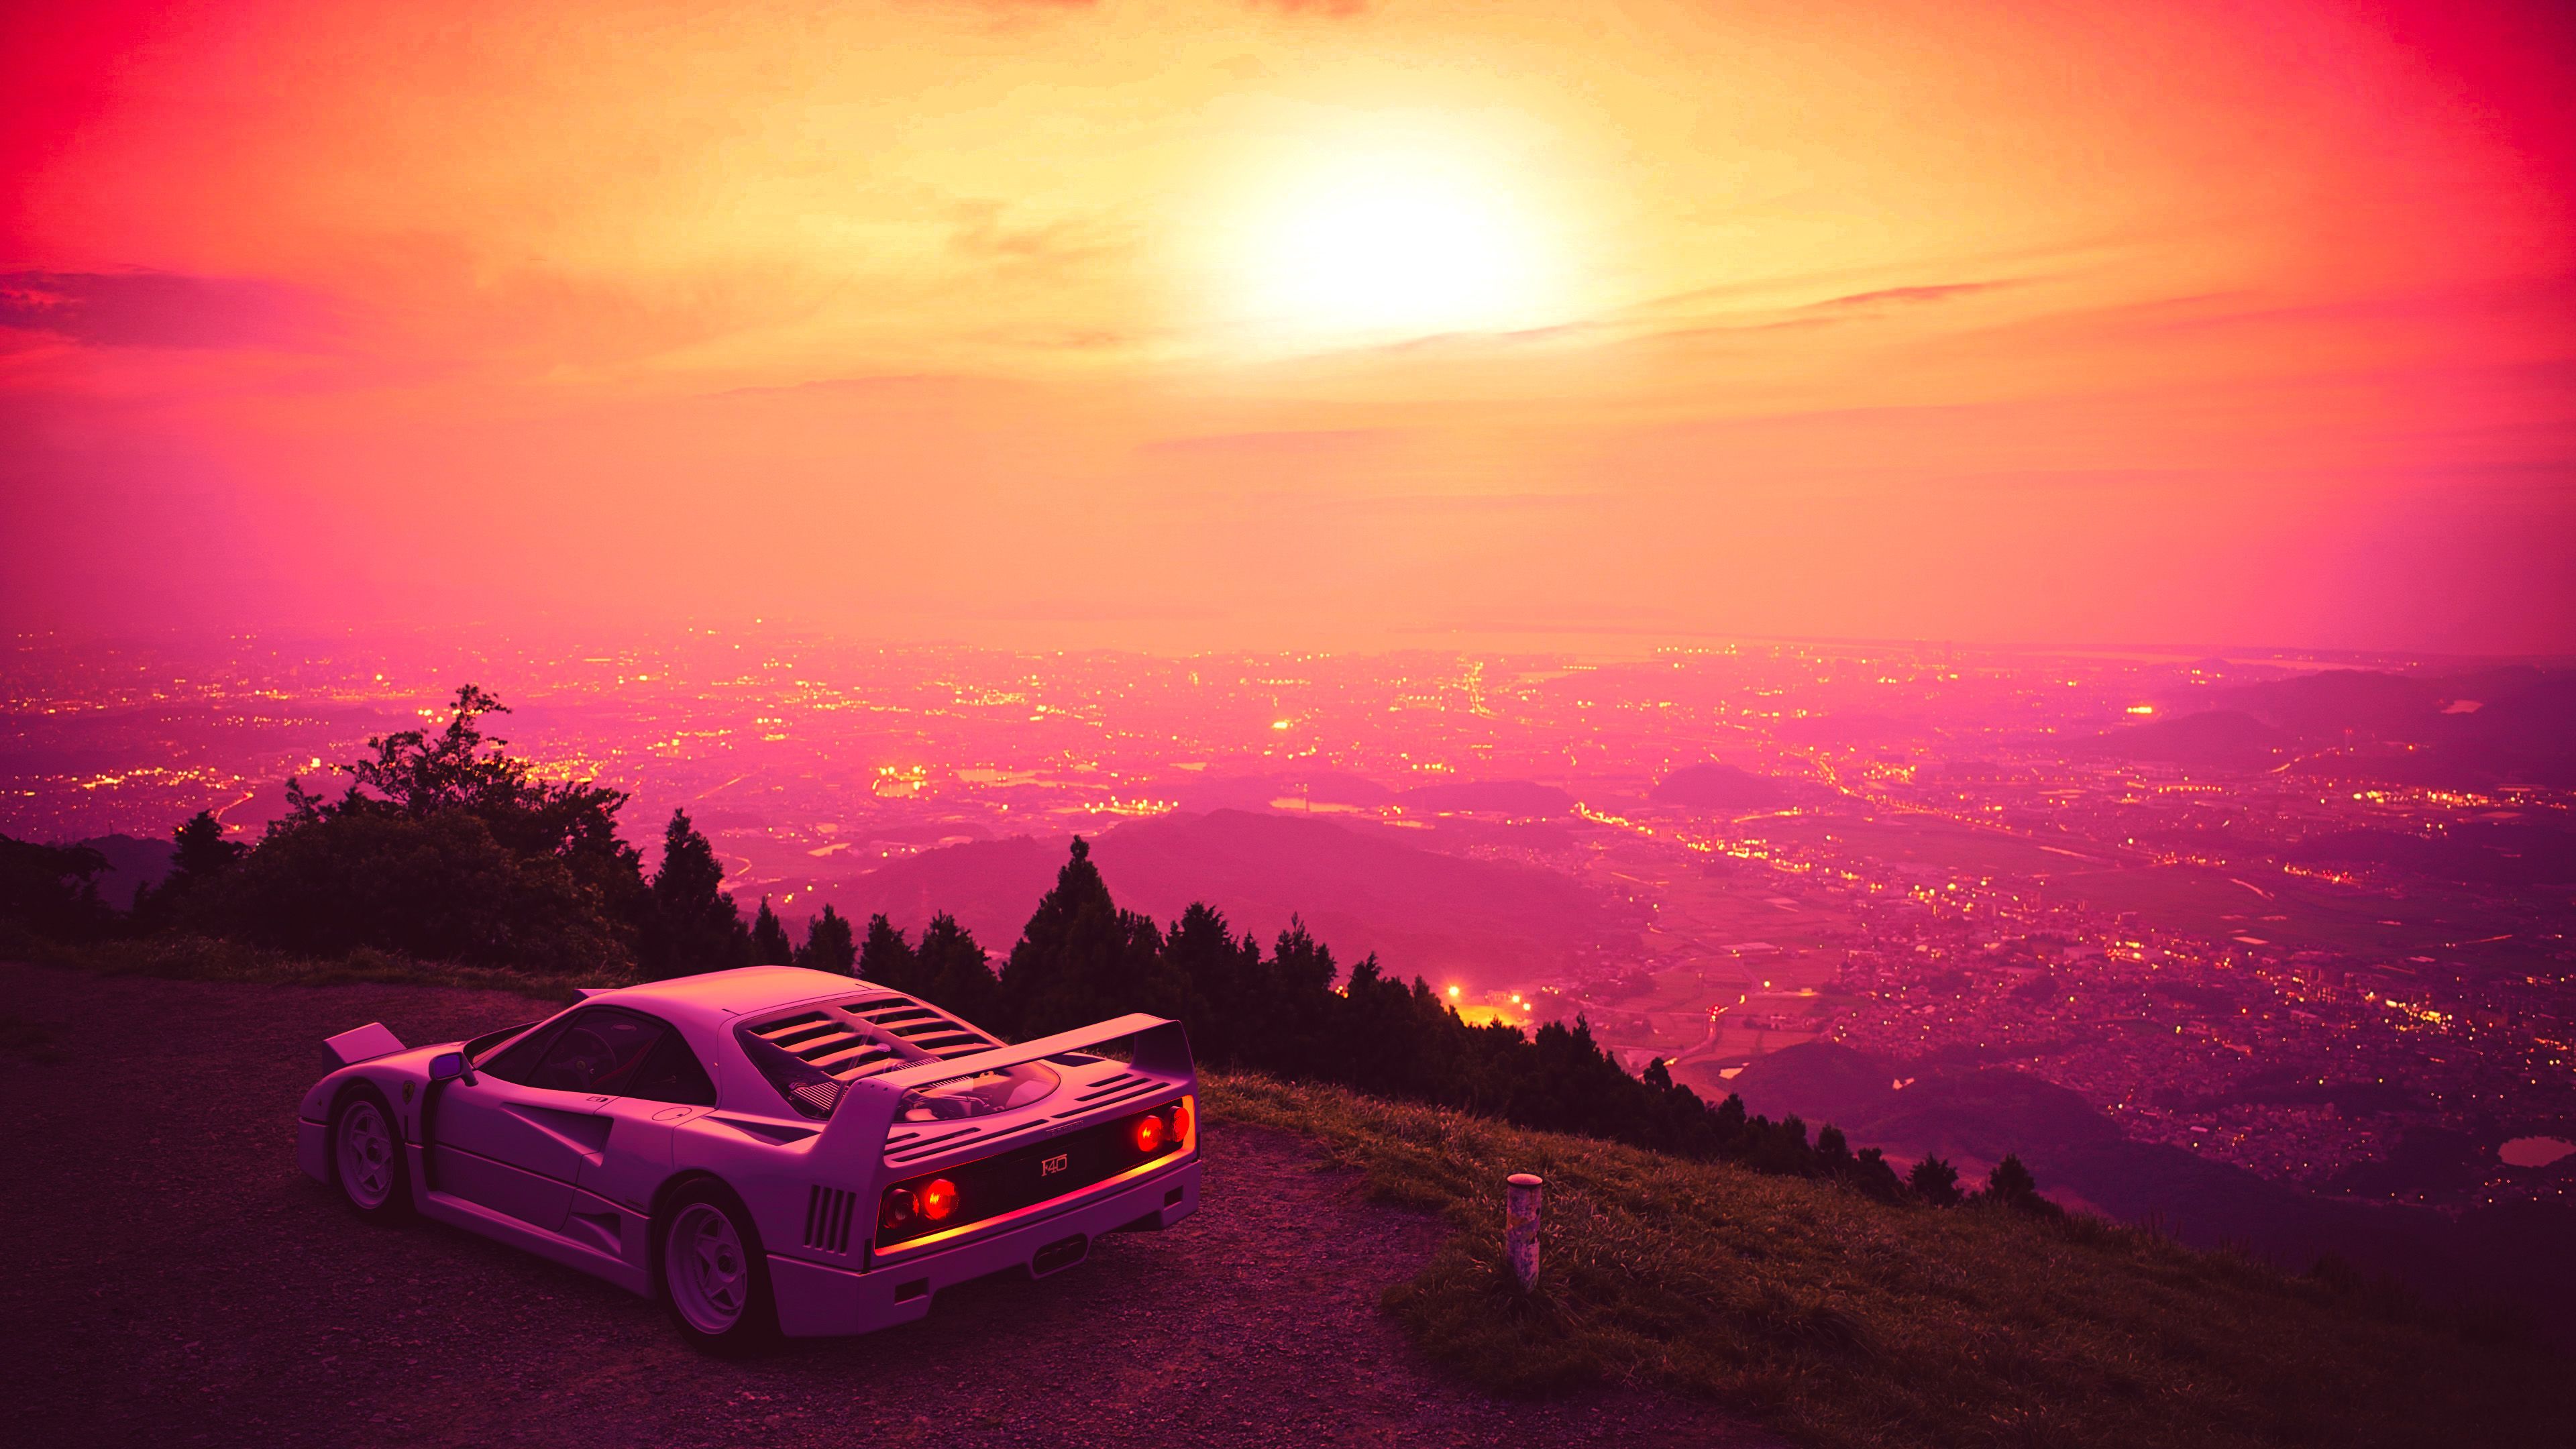 Outrun Sunset 4K Wallpaper, HD Artist 4K Wallpaper, Image, Photo and Background